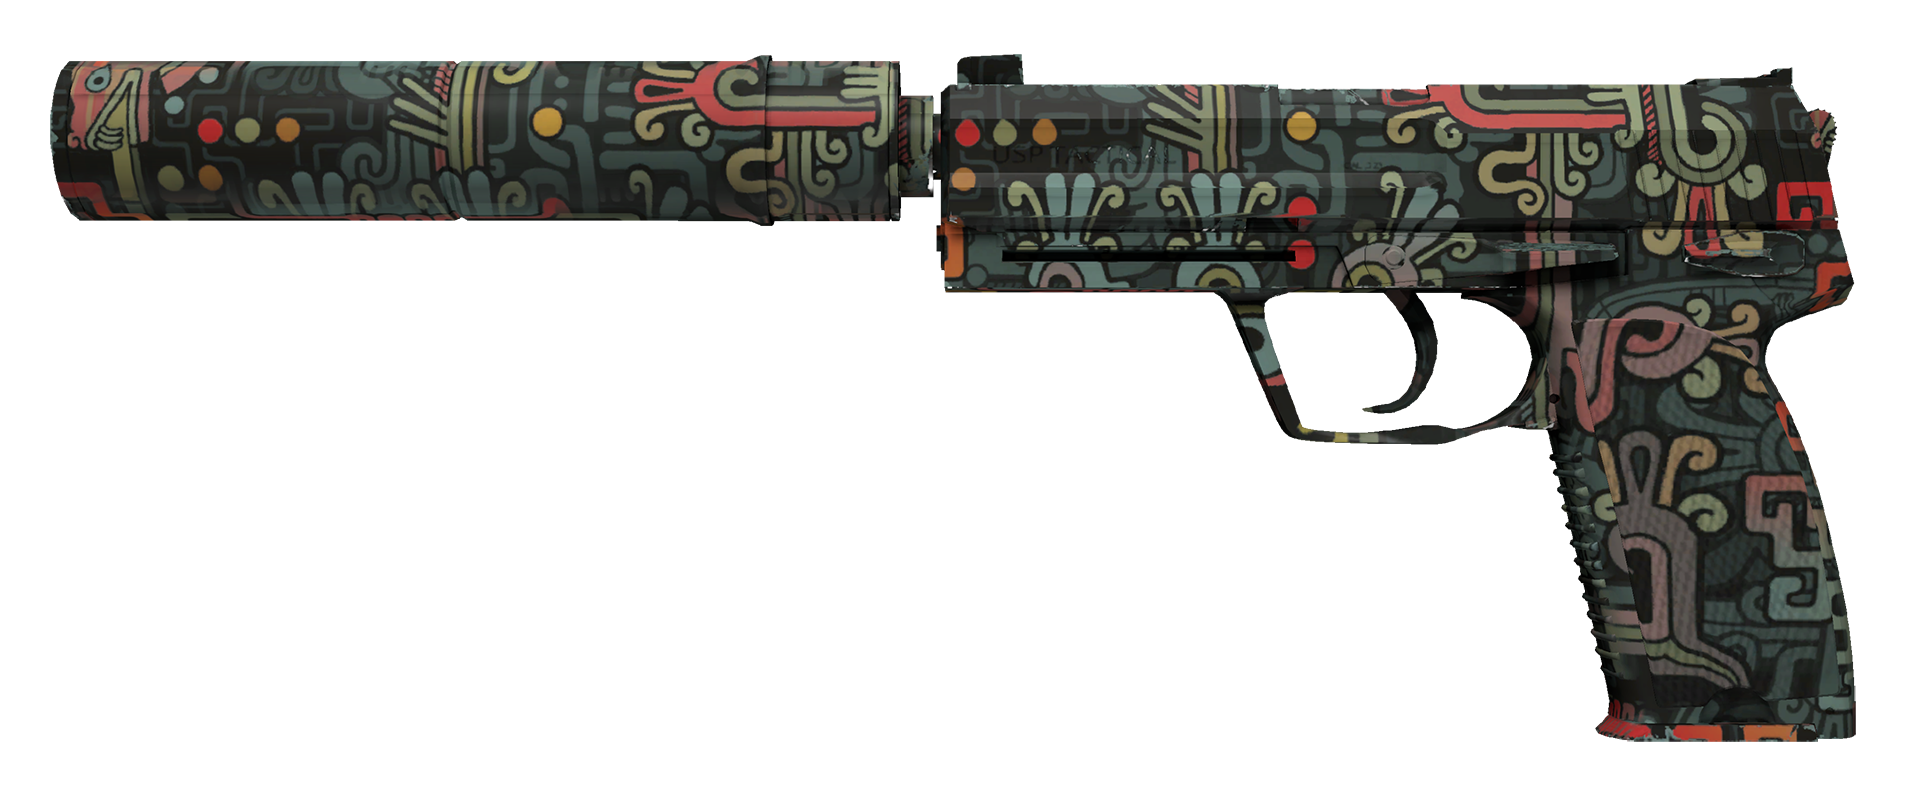 USP-S Ancient Visions Large Rendering